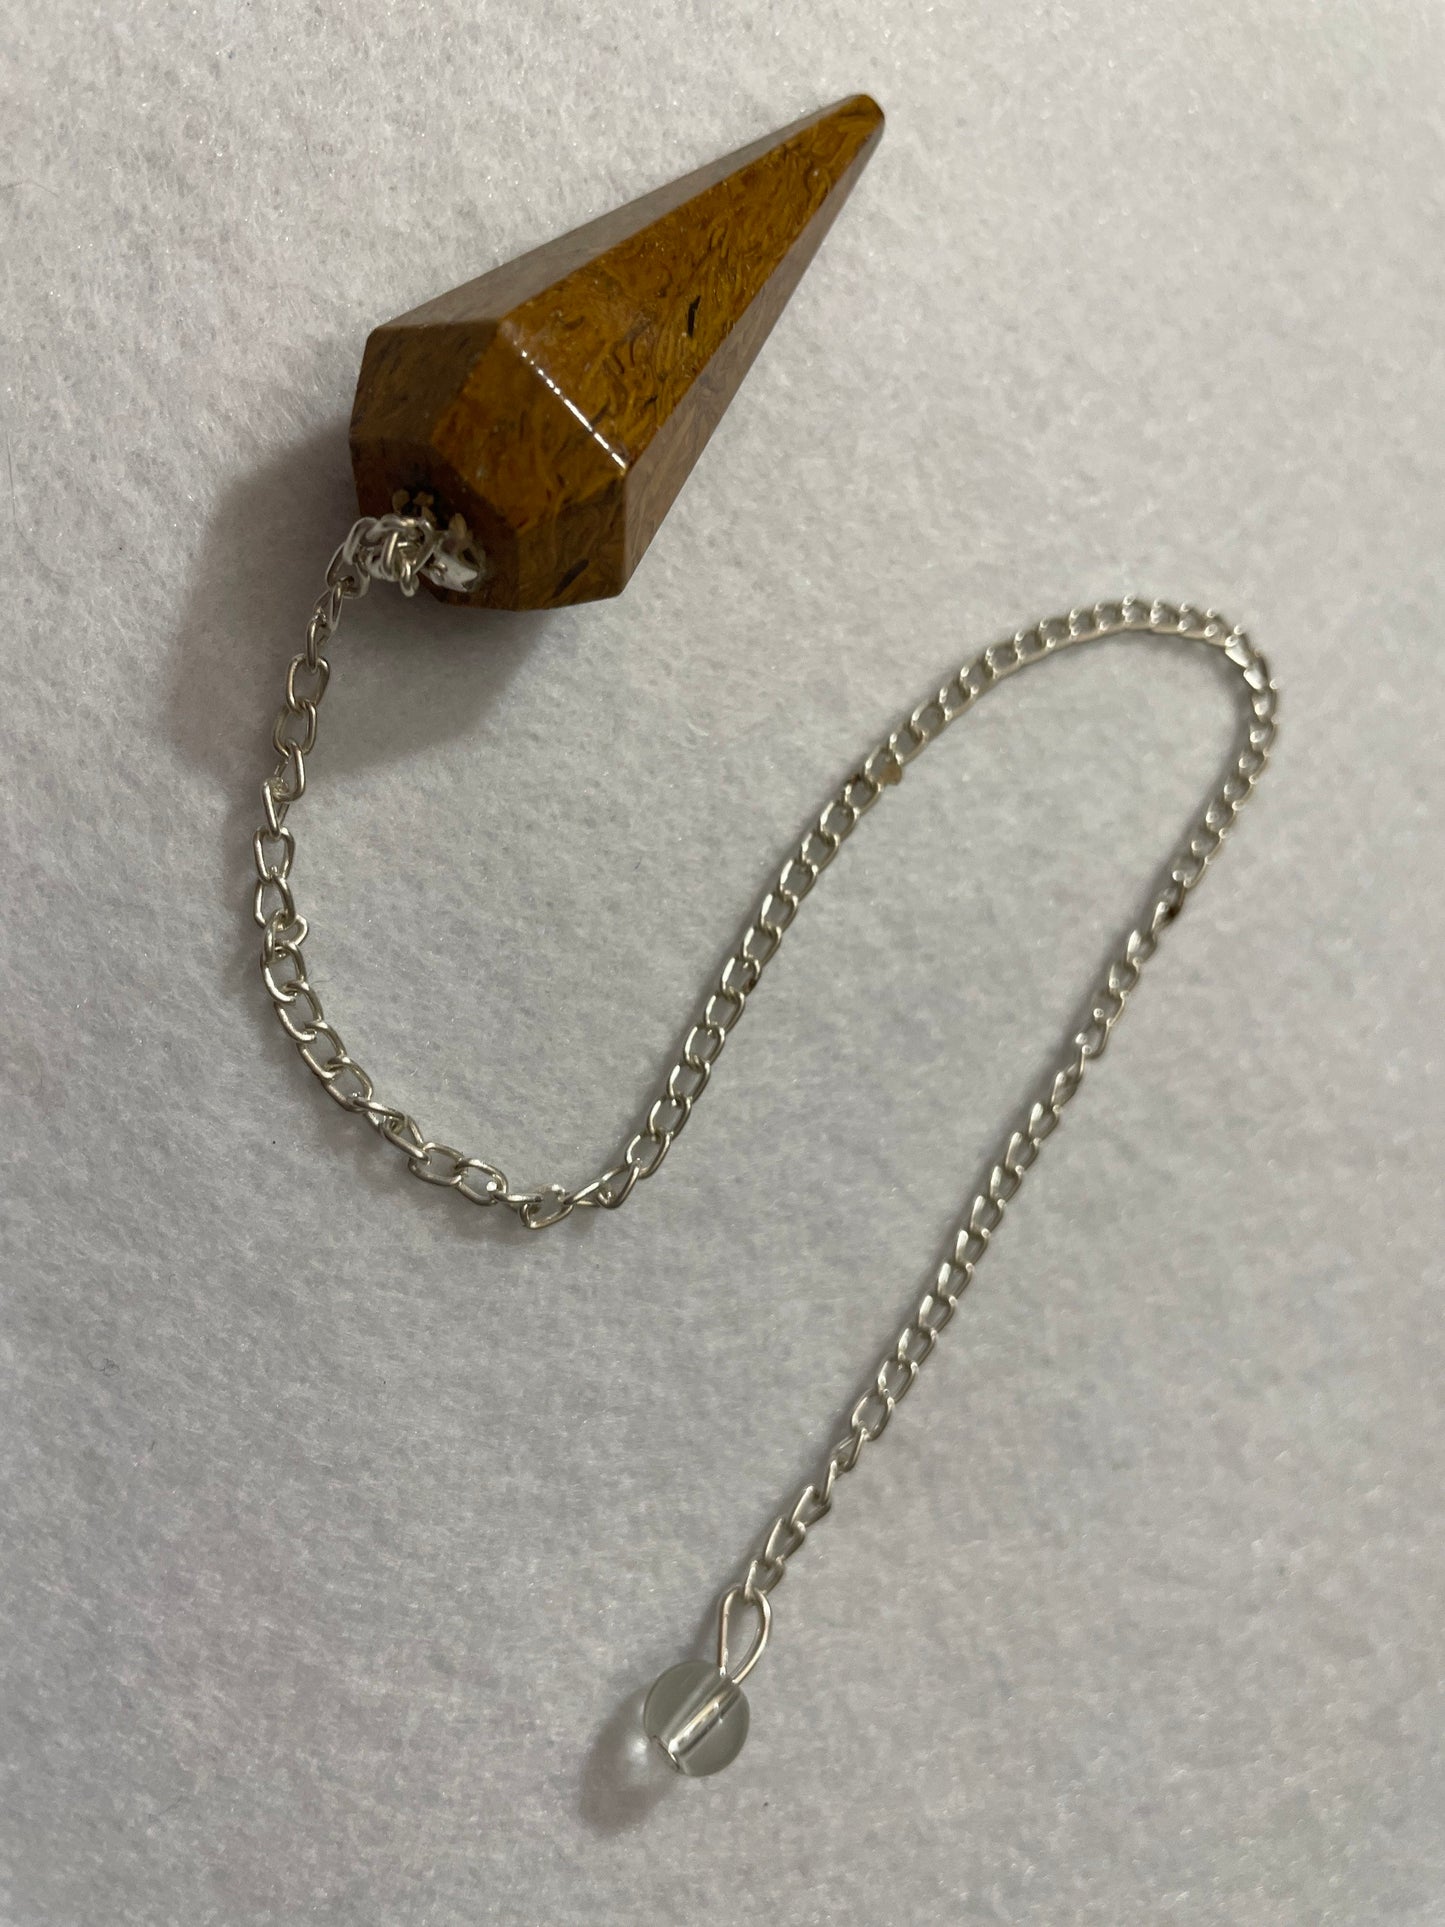 This beautiful Yellow Jasper Pendulum is 1.75” with the chain it is approximately 10.5”.